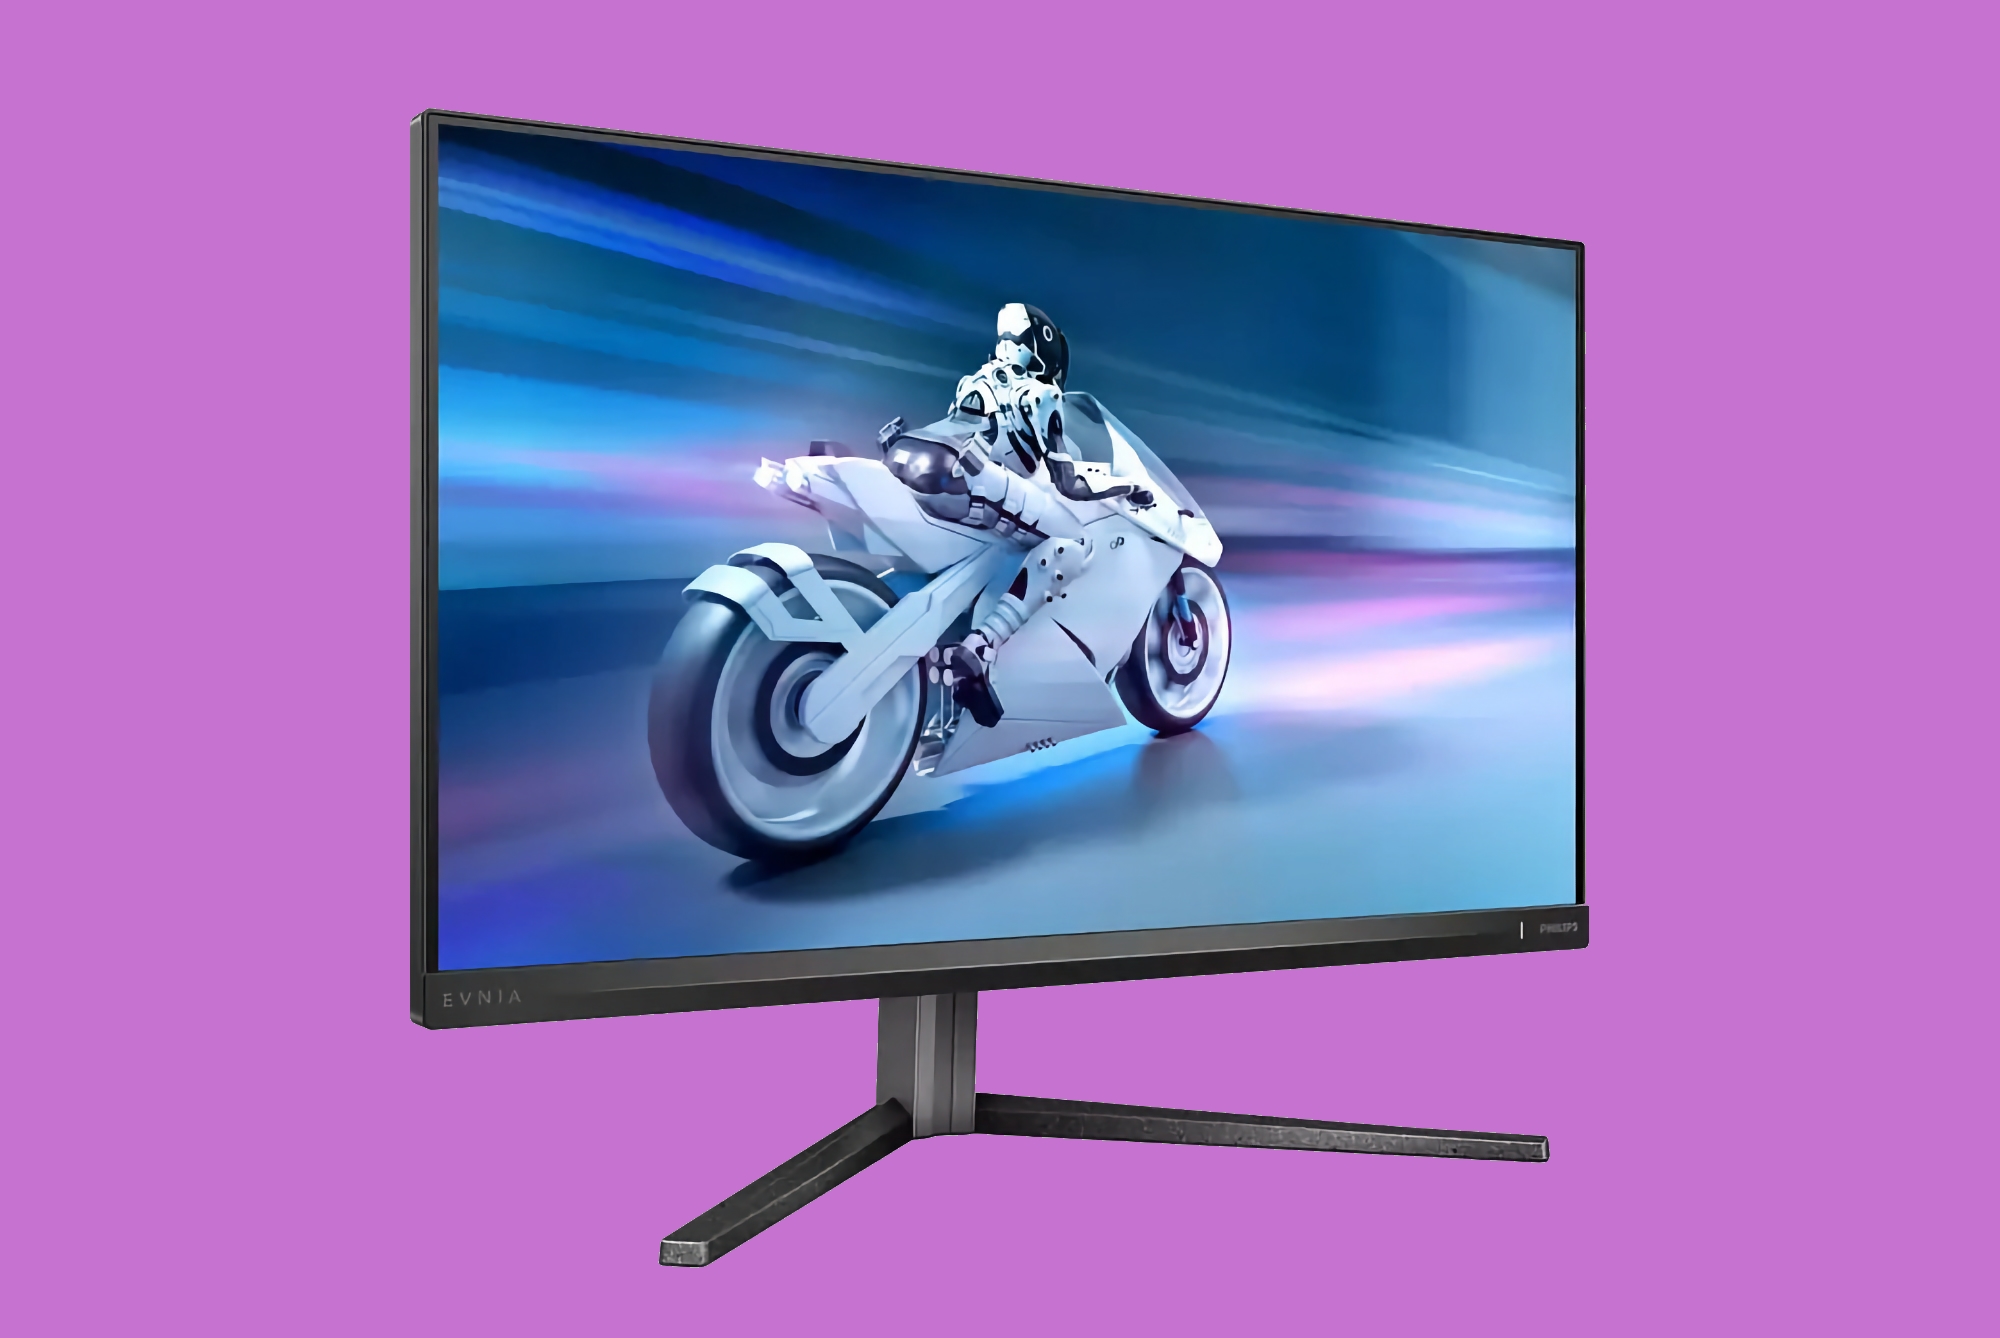 Philips Evnia 27M2N5500: gaming monitor with 180Hz IPS screen for $305